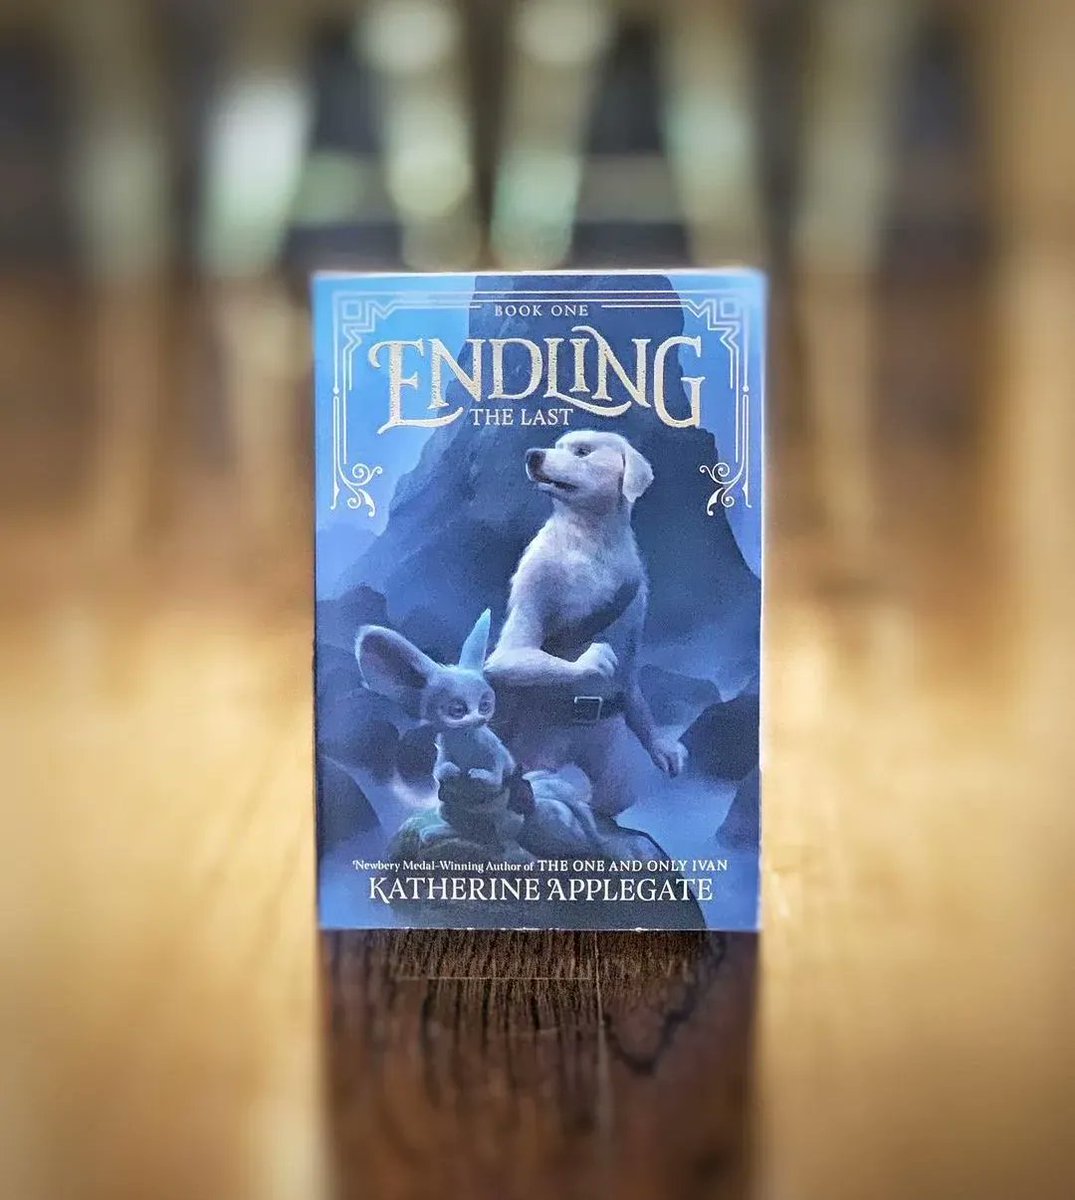 'There are many scholars, but few seekers after truth. Humans believe the things that make them feel safe. They care little for difficult facts.'
🍃⚔️🐕
#EndlingBooks @HarperChildrens #mglit